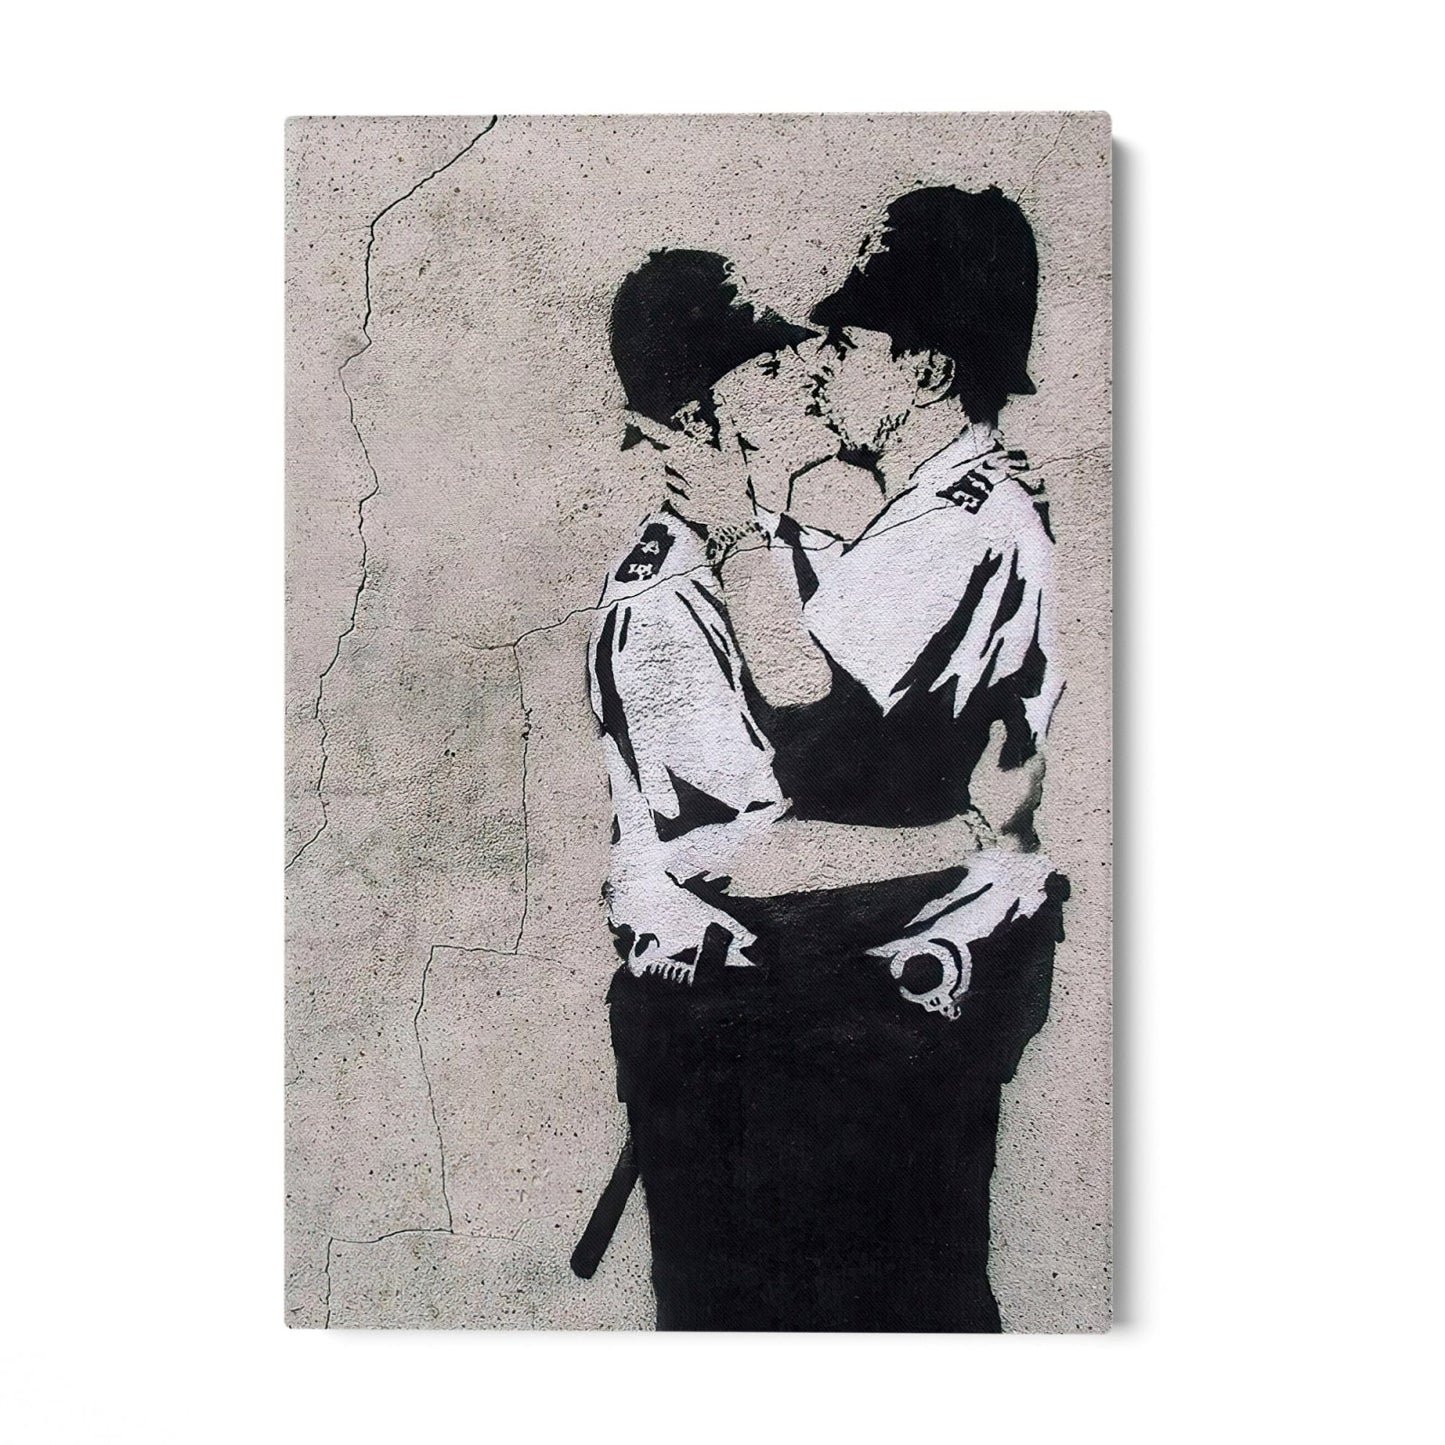 Kissing Coppers, Banksy